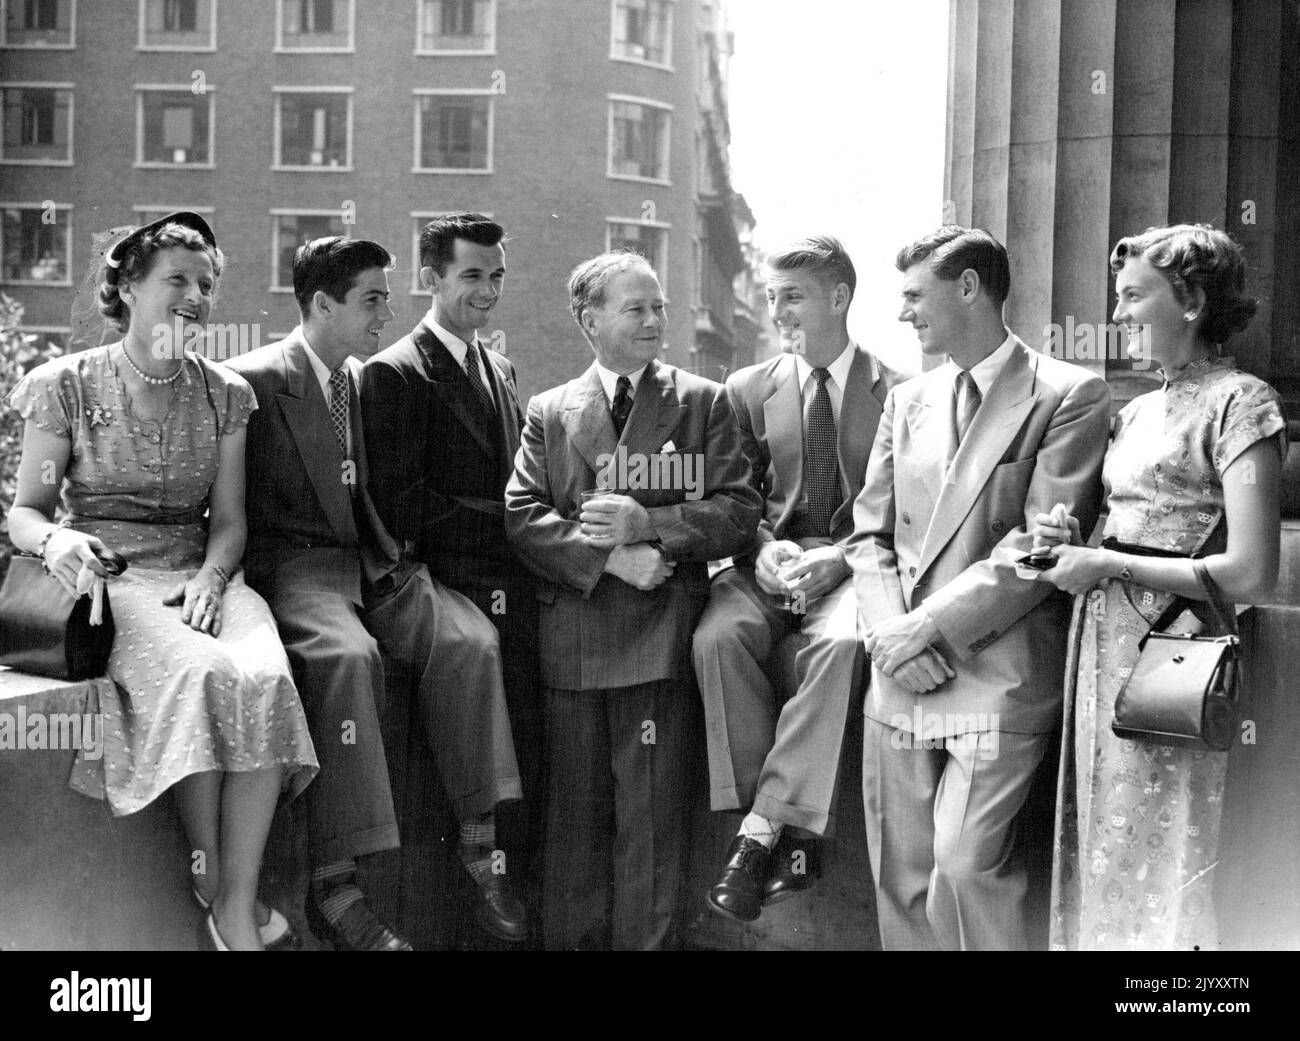 Balcony Scene - Mrs. Harry Hopman (wife of the team captain): Ken Rosewall: Mervyn Rose: Sir Thomas White: Lewis Hoad: Frank Sedgman: Beryl Penrose. In the Heatwave - London's eighty-old temperature sends members of the Australian tennis team (now successfully competing at Wimbledon) on to the balcony of Australia House, Strand, during a reception given by Australian High Commissioner Sir Thomas White to-day (Tuesday). July 01, 1952. (Photo by Reuter Photo). Stock Photo